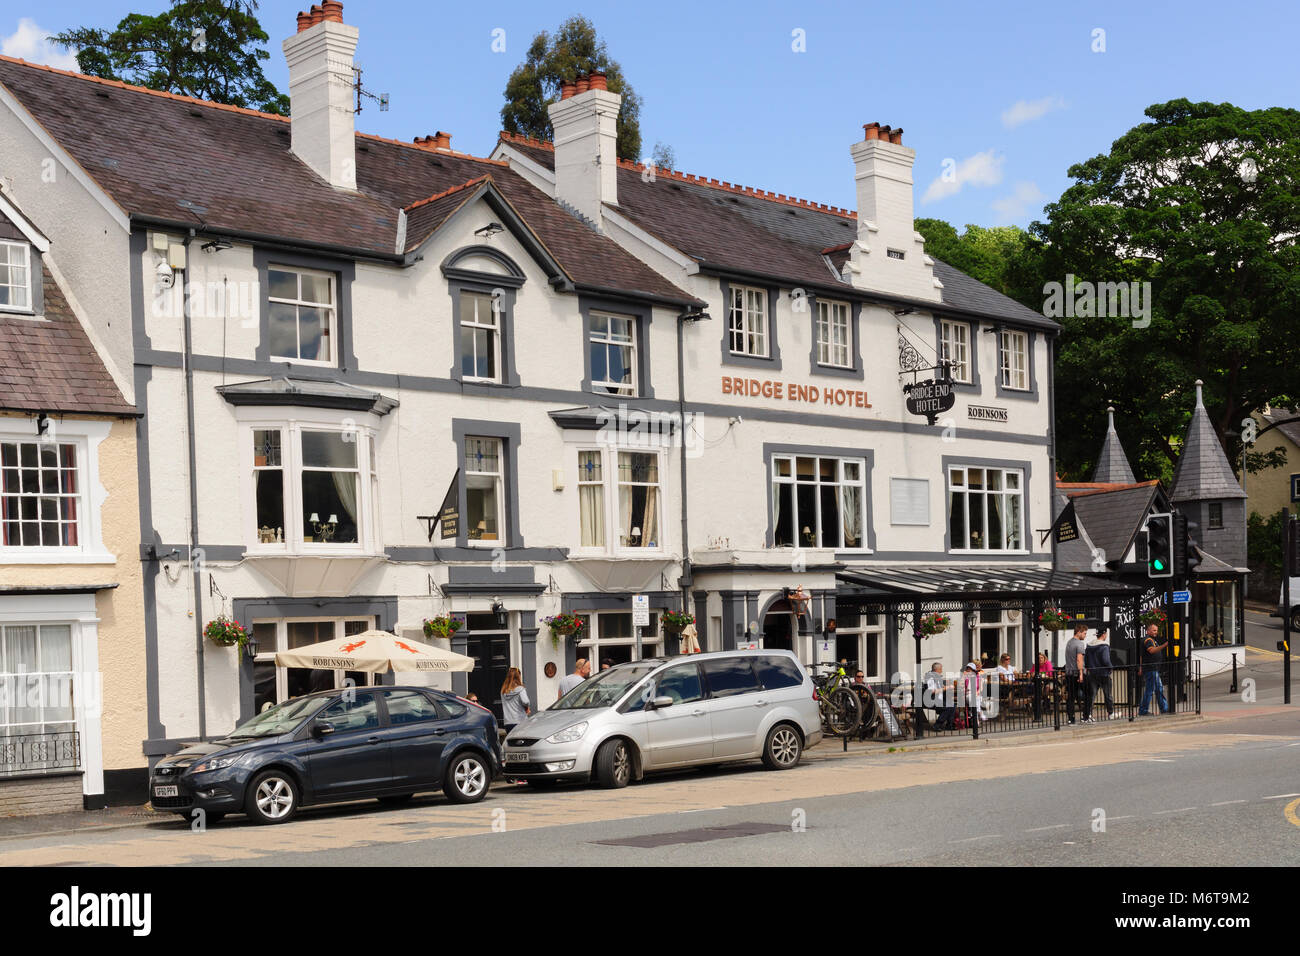 The Bridge End Hotel a popular bar and restaurant overlooking the River Dee in Llangollen North East Wales Stock Photo